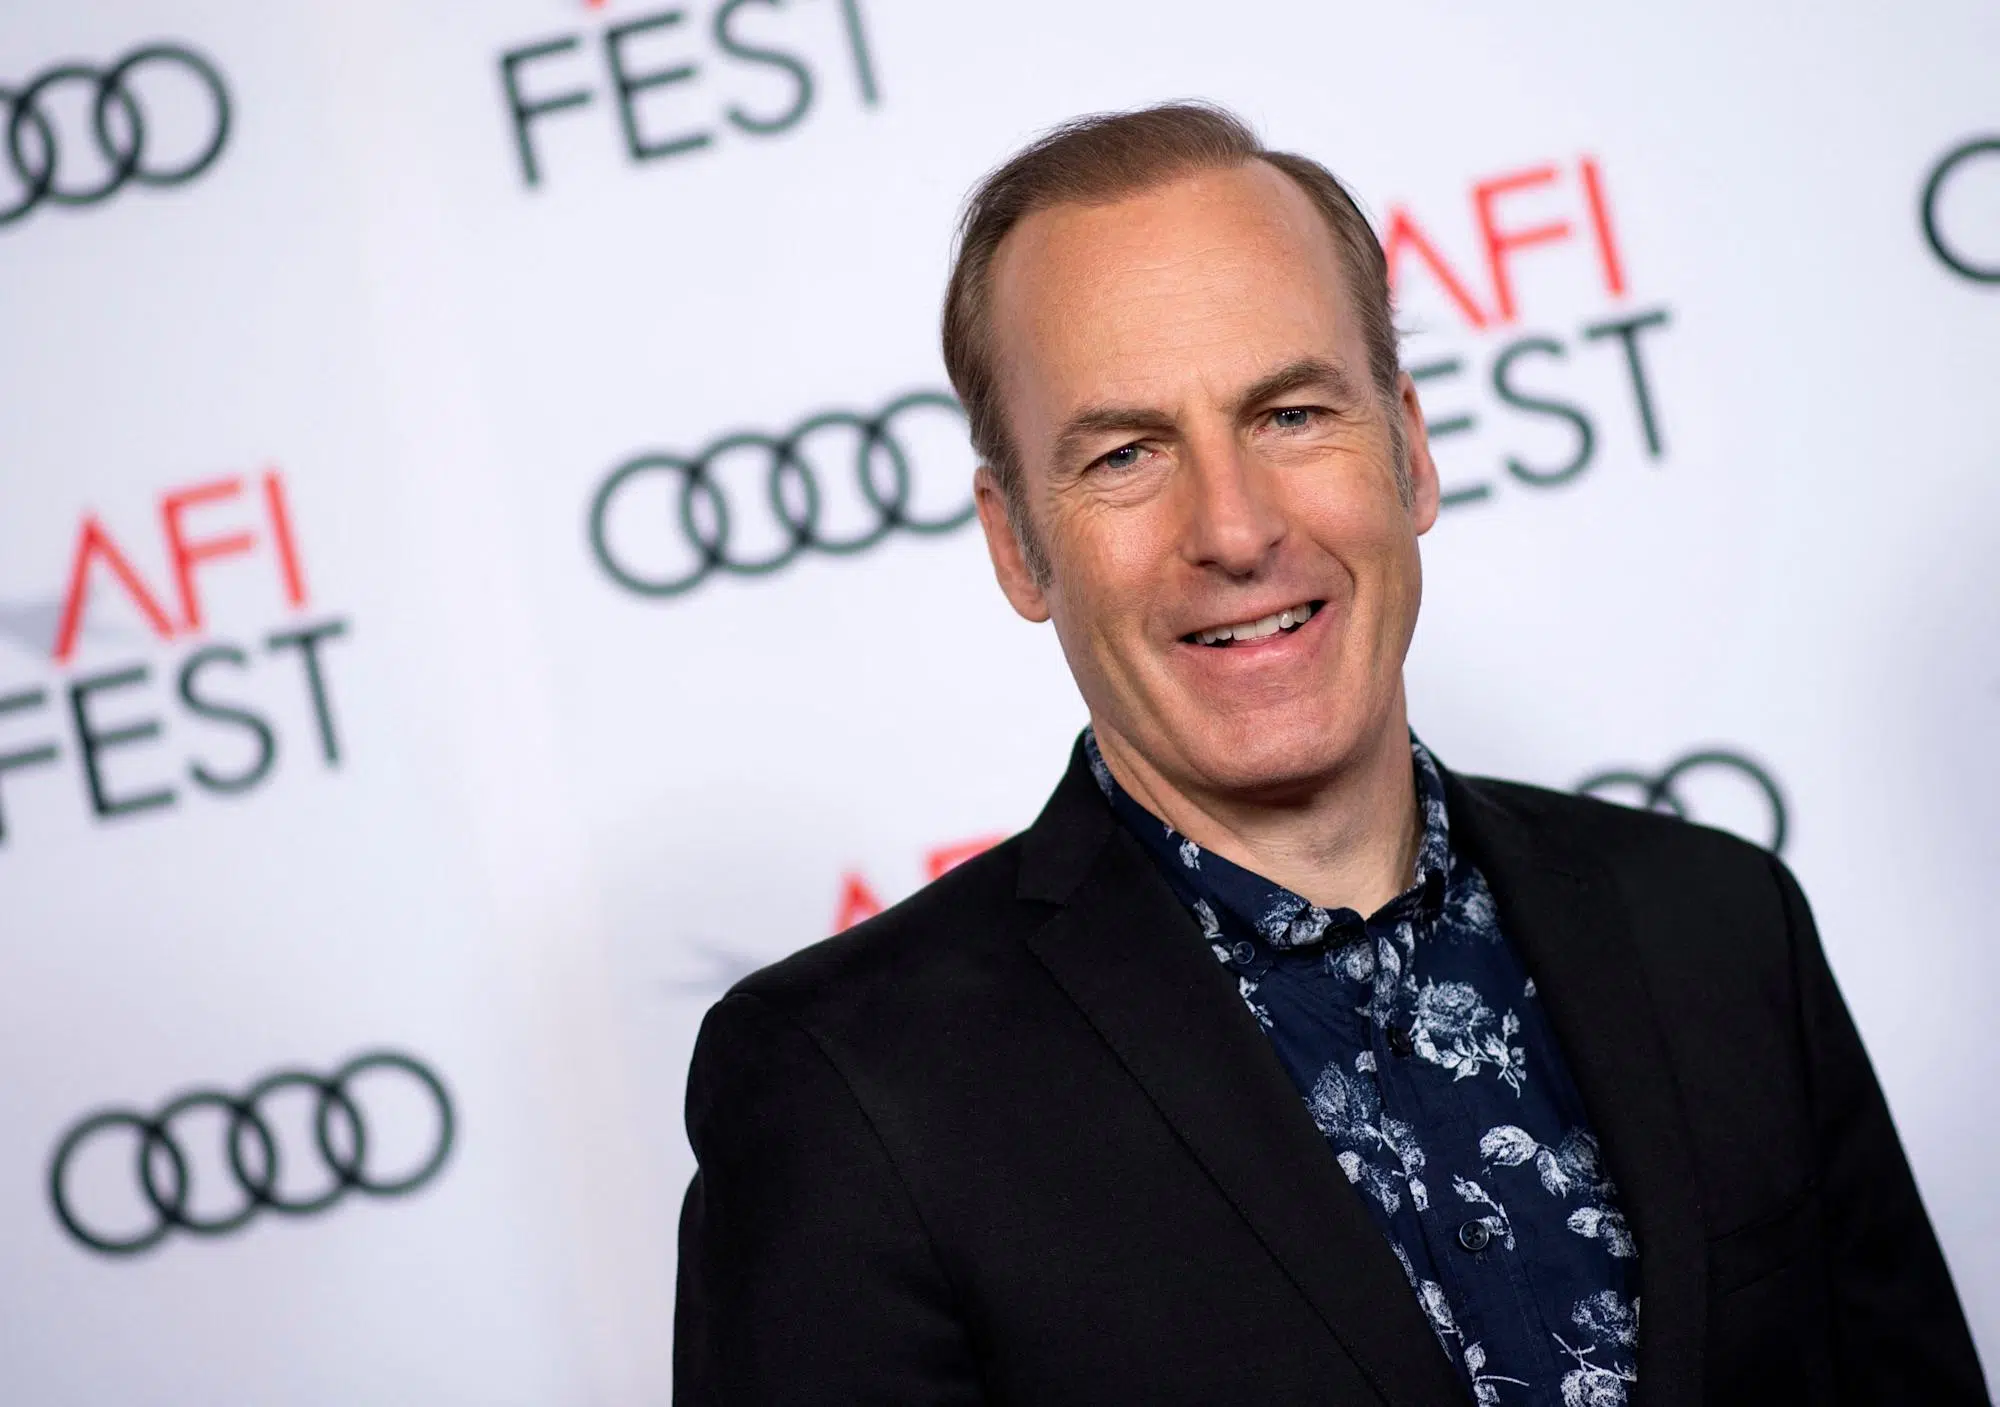 Bob Odenkirk Updates Fans, Says He's 'Doing Great' After Heart Attack